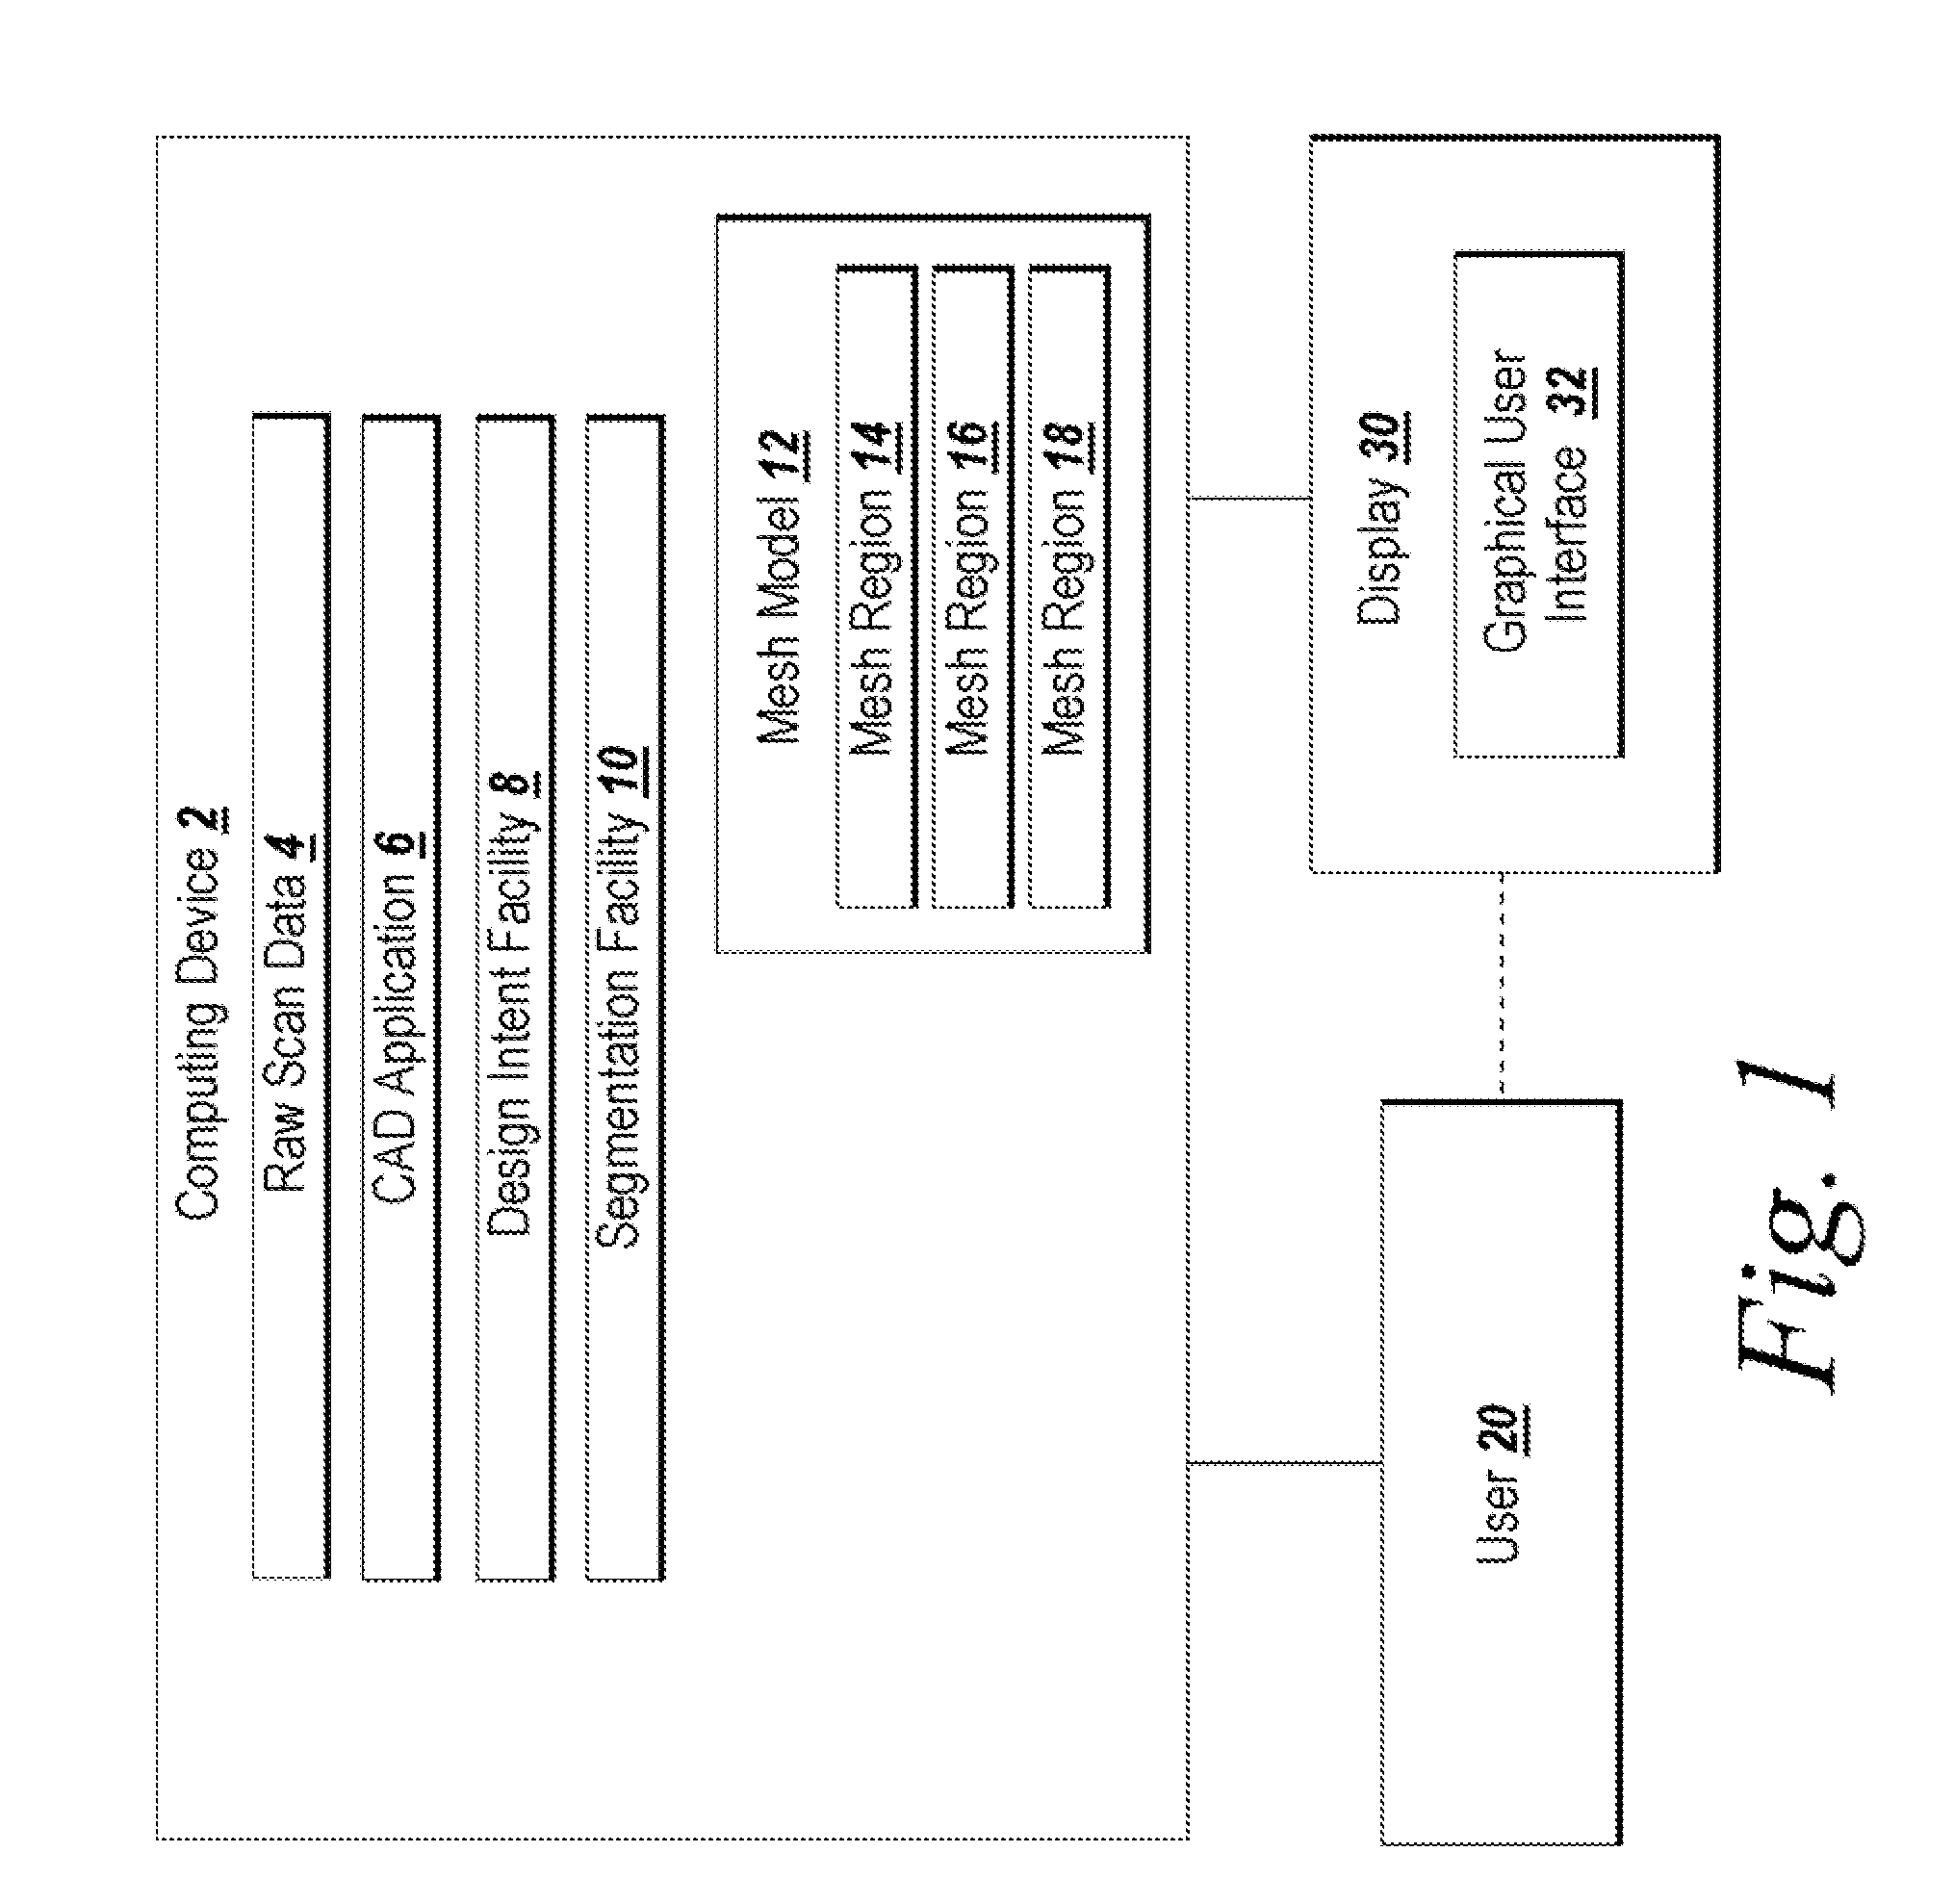 System and Method for Identifying Original Design Intents Using 3D Scan Data